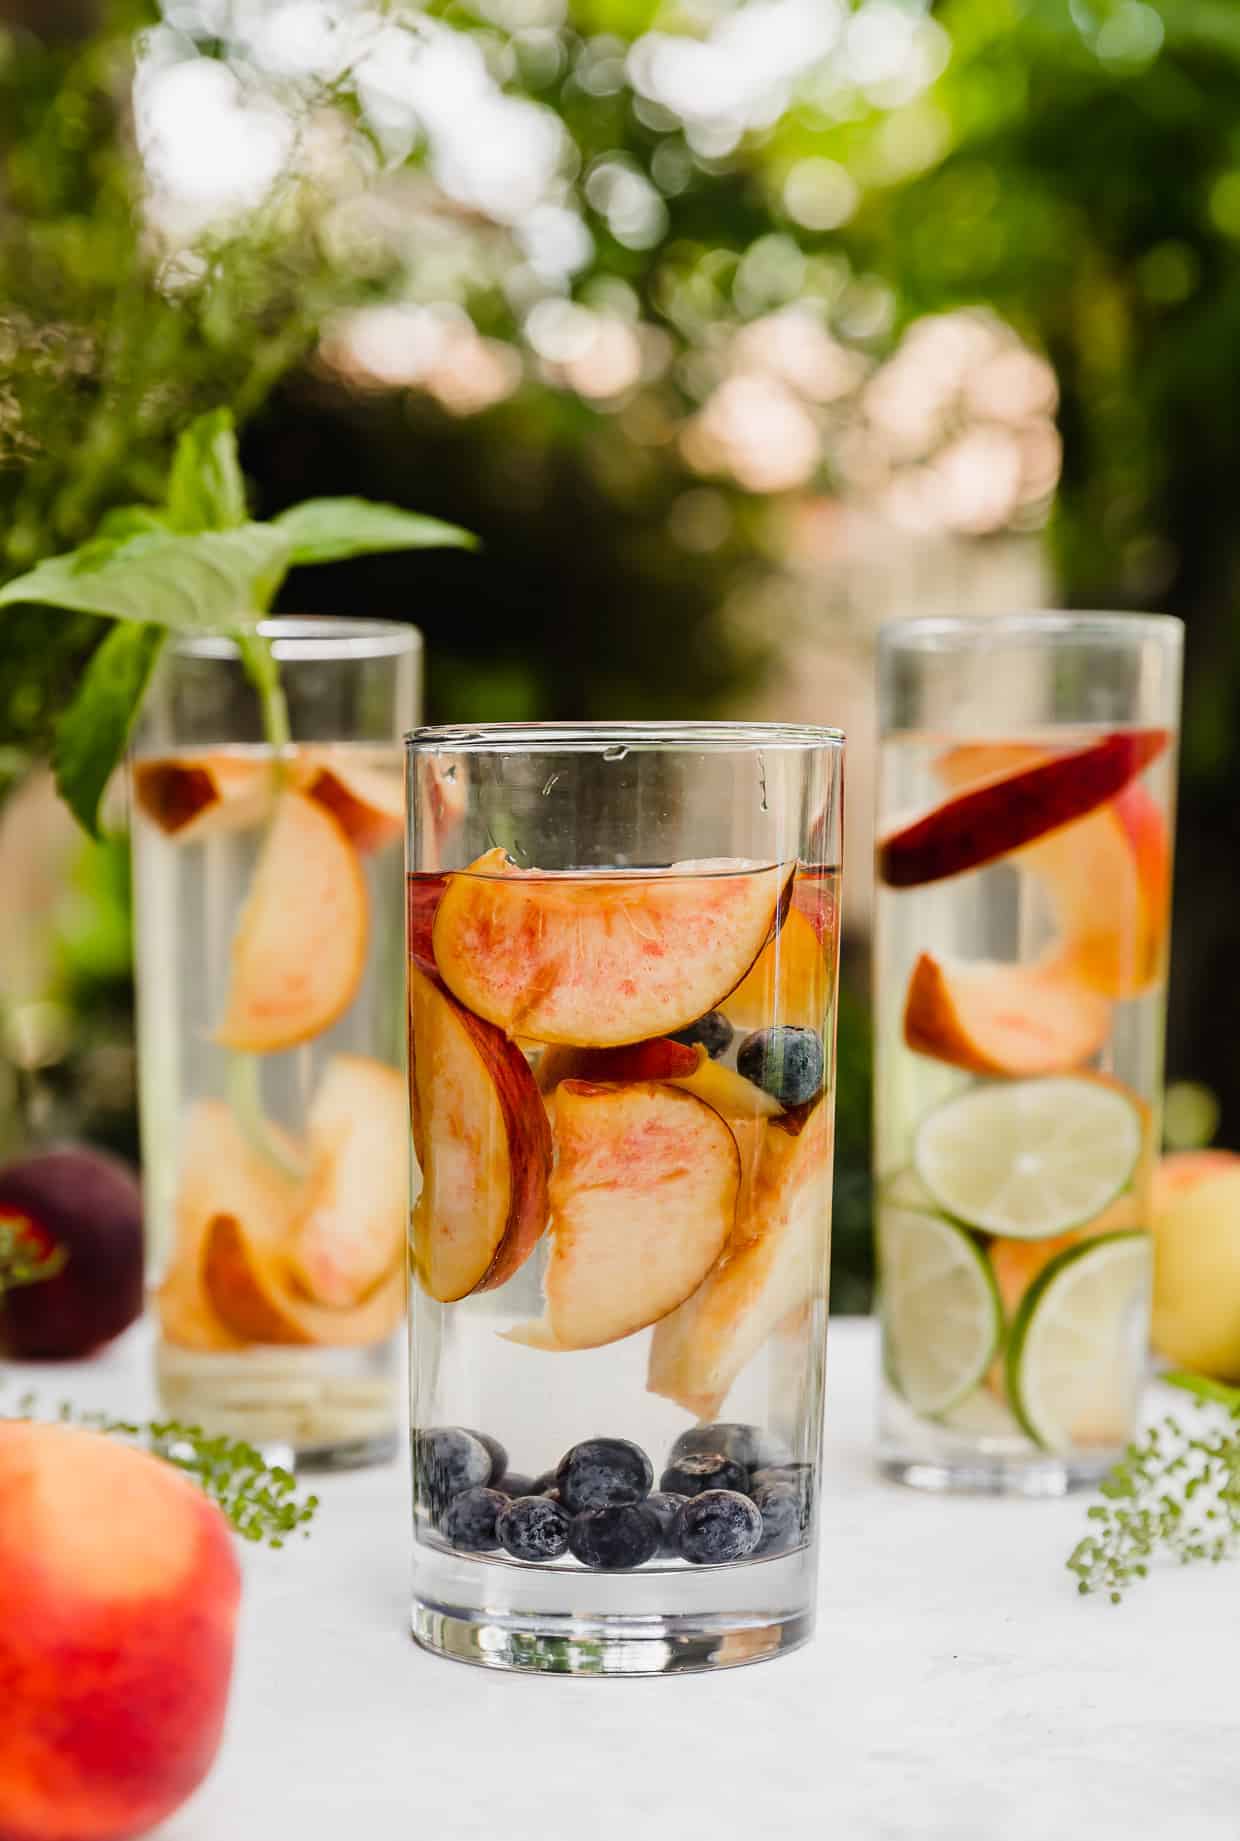 A glass of water full of sliced peaches and fresh blueberries.